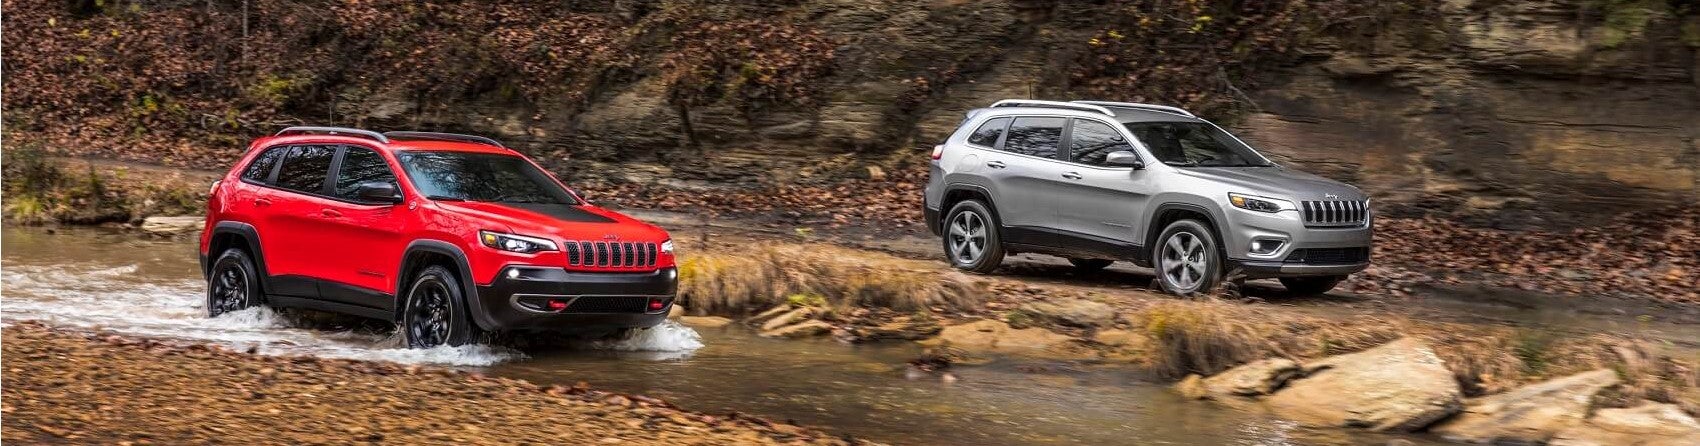 Jeep Cherokee Safety features